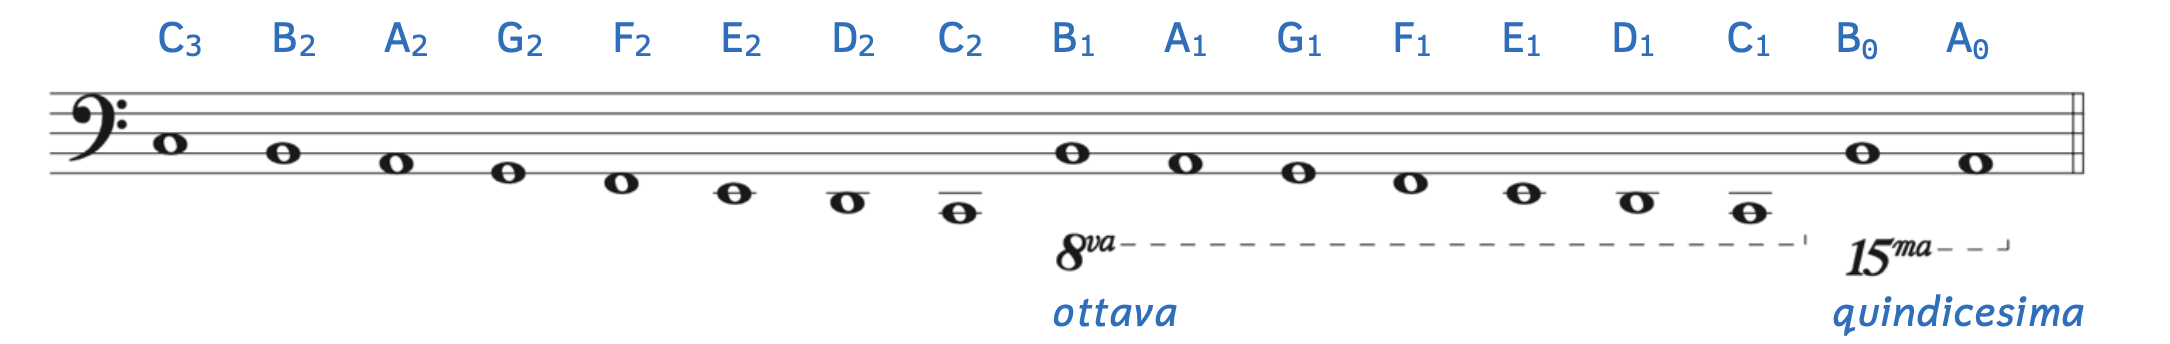 Low notes in the bass clef using octave signs. The example begins with C3 and descends to C2. At B1, the B appears to be B2 but the Ottava sign (8, v, a) is written below, which tells the musician the note is actually an octave lower. The notes descend to C1. At B0, the B again appears to be B2 but the quindicesmia sign (15, m, a) is written below, which tells the musician the note is actually two octaves lower. The notes descend to A0.